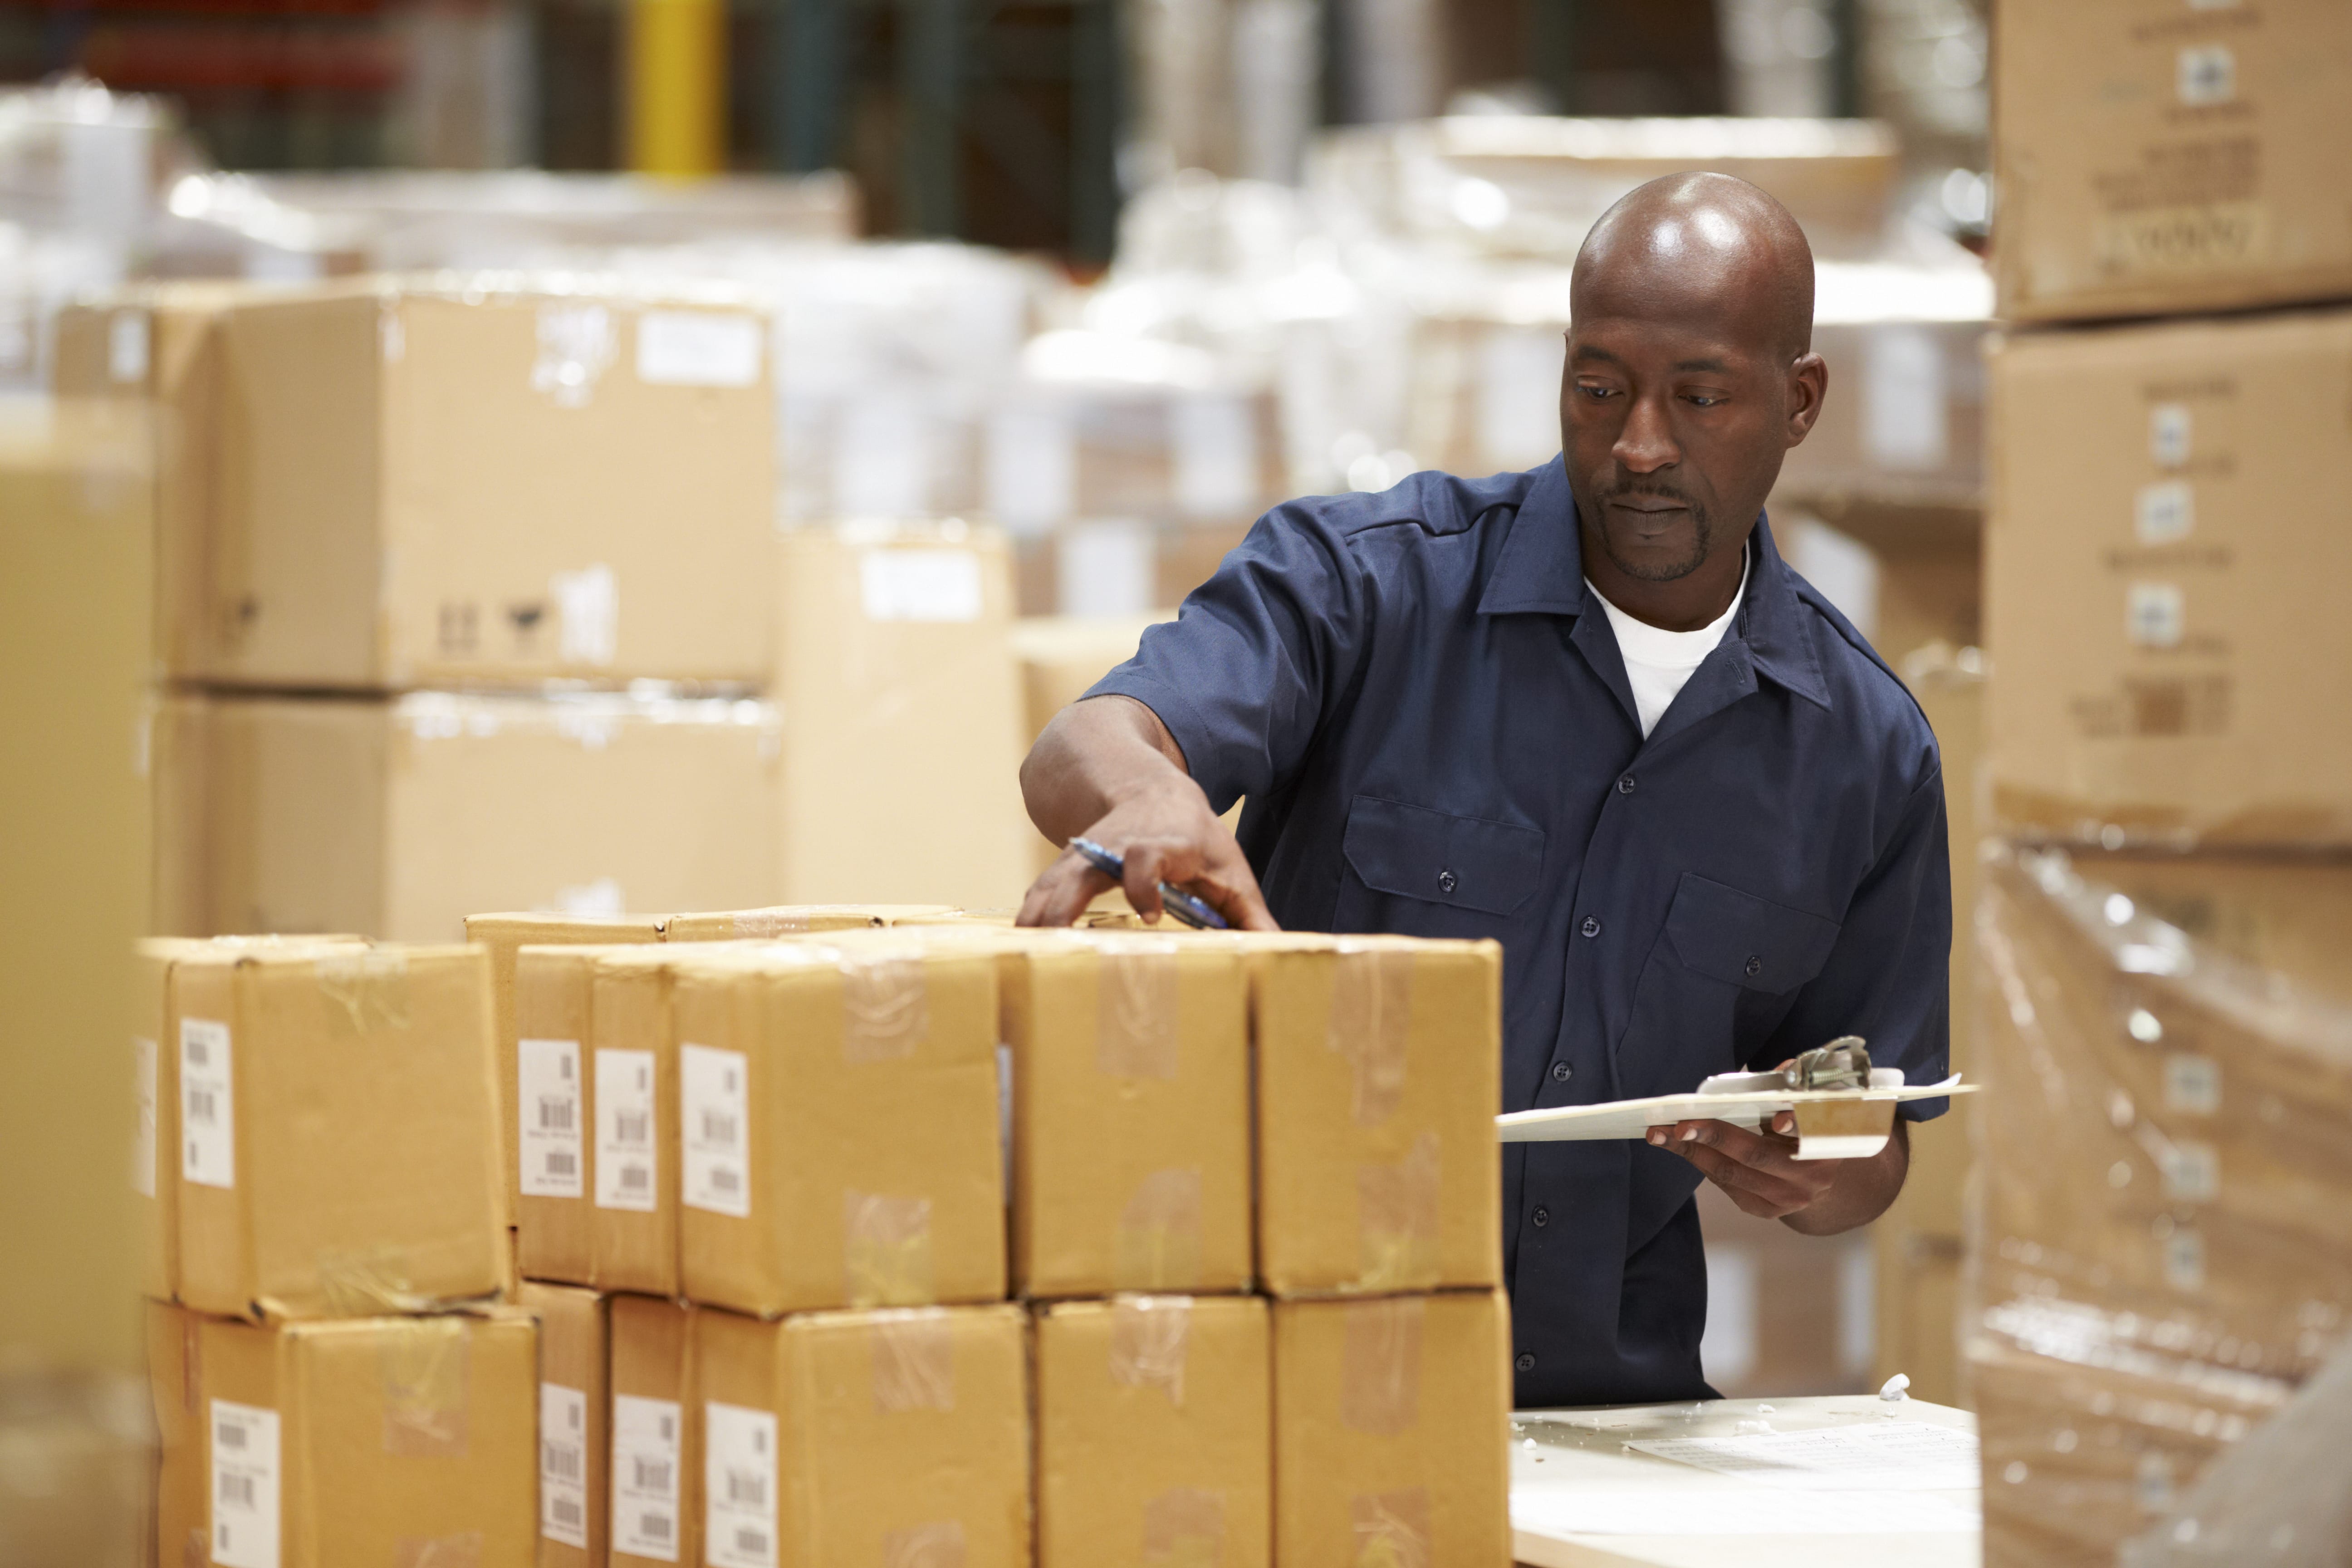 Delivery working inspecting parcels in a warehouse